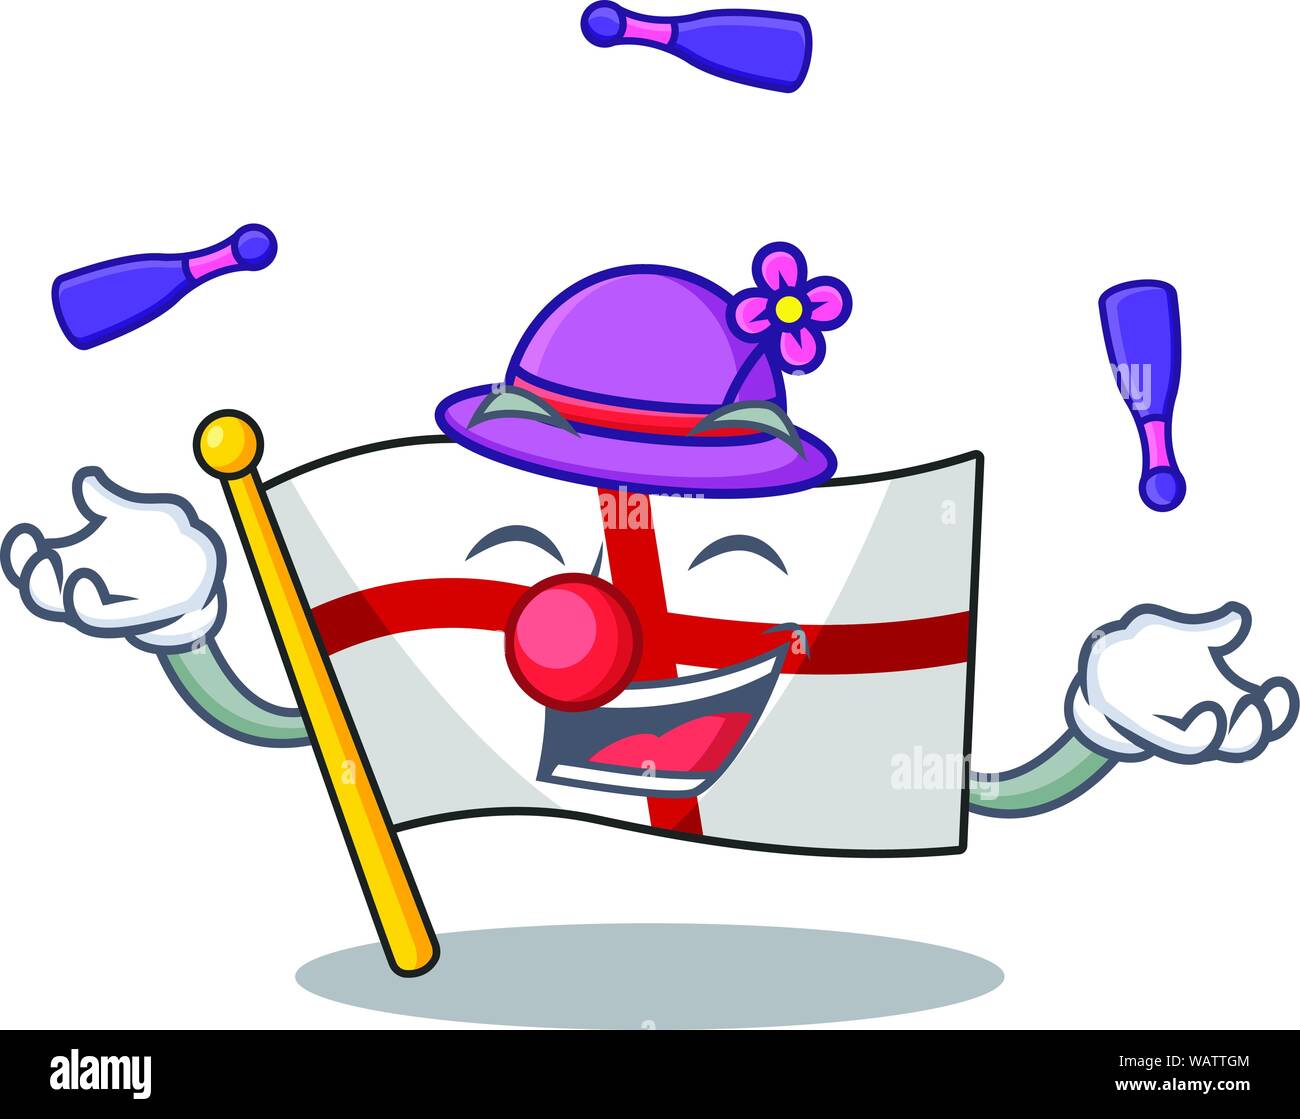 Juggling flag england hoisted on character pole Stock Vector